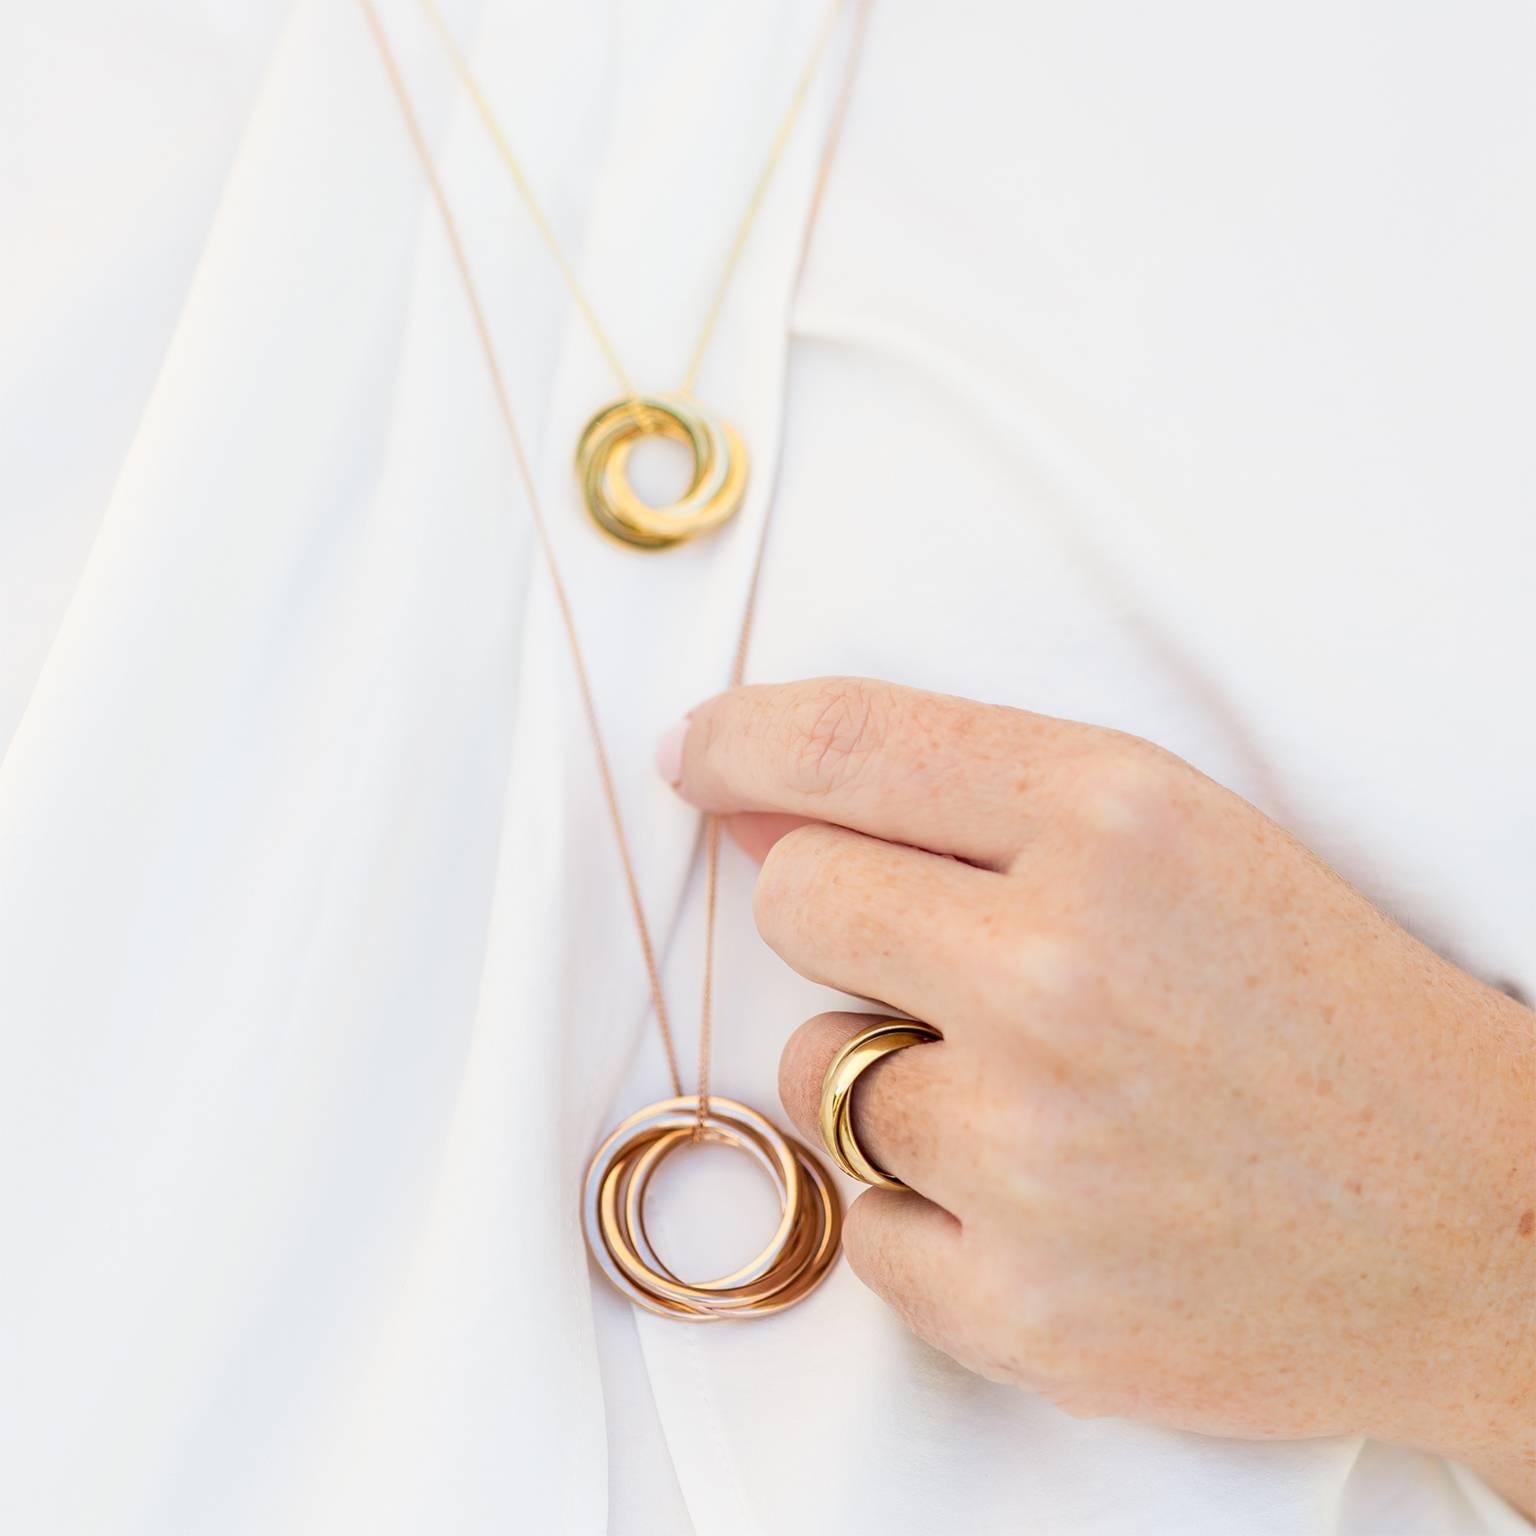 The diamonds in this russian ring necklace add luxury to the classic concept of family unity and togetherness, as represented by the interconnected three rings. Blending the three golds together - rose gold, white gold, yellow gold -
makes for a